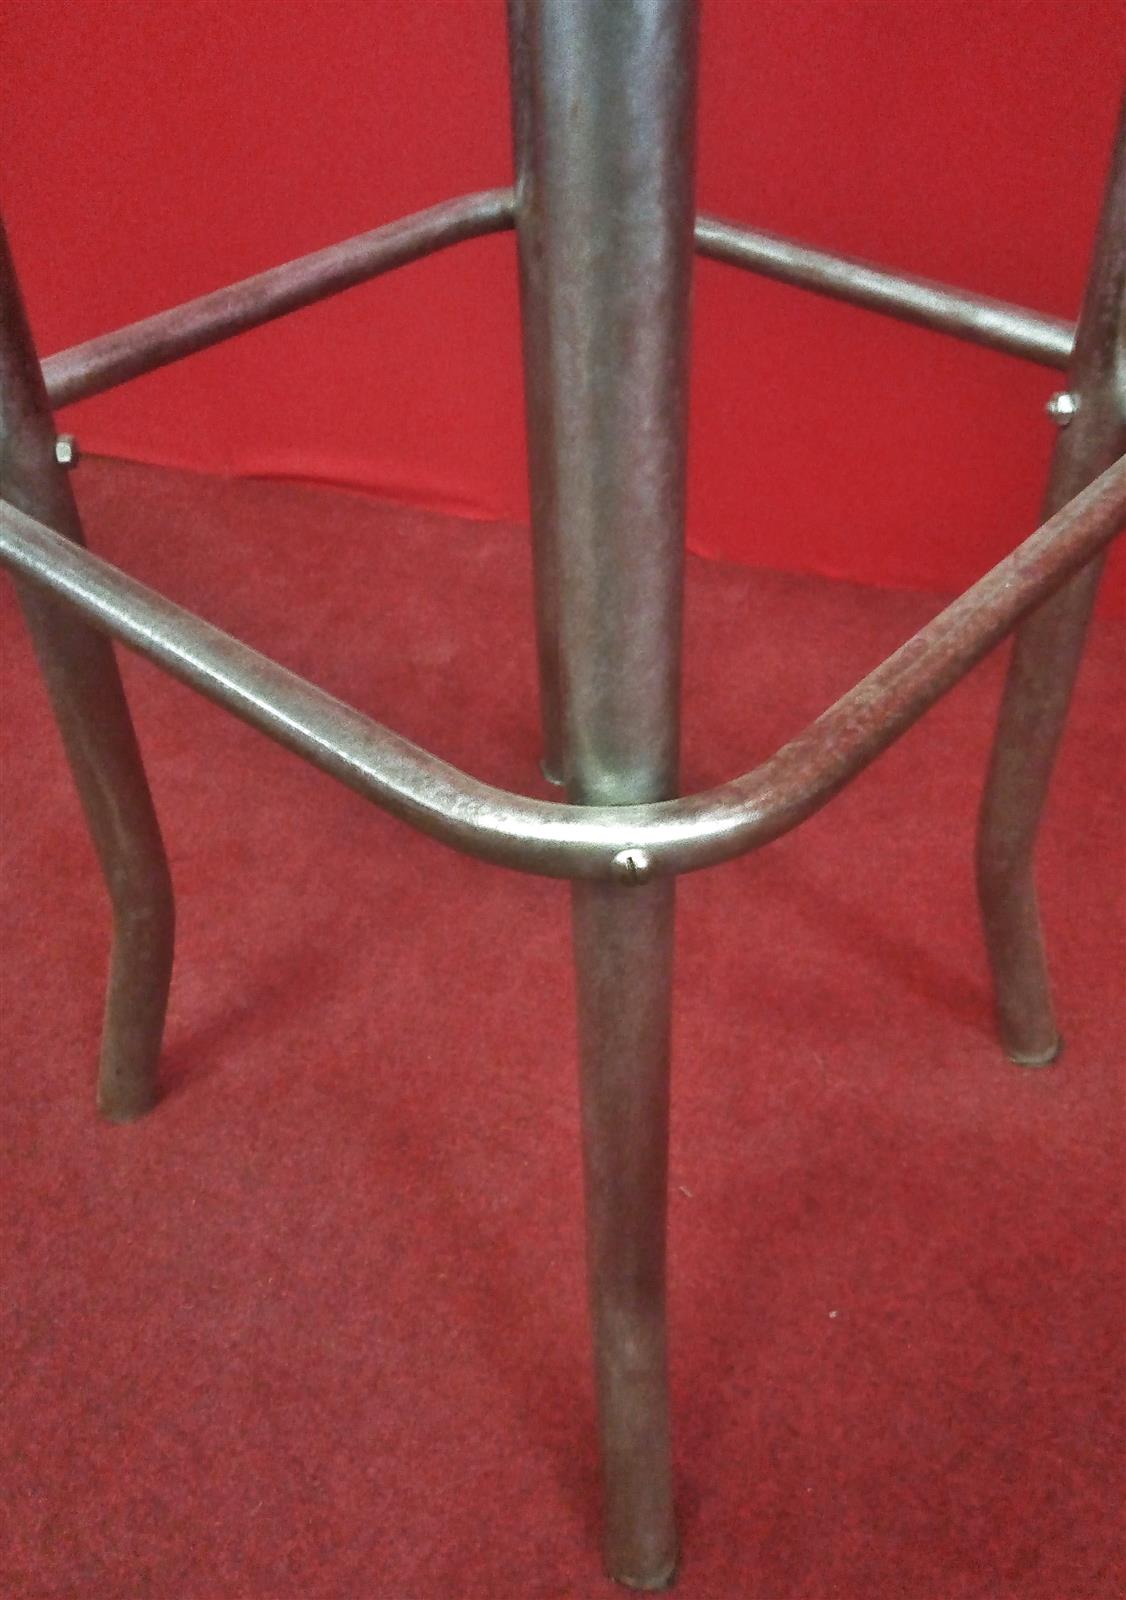 Group of 5 chromed metal stools